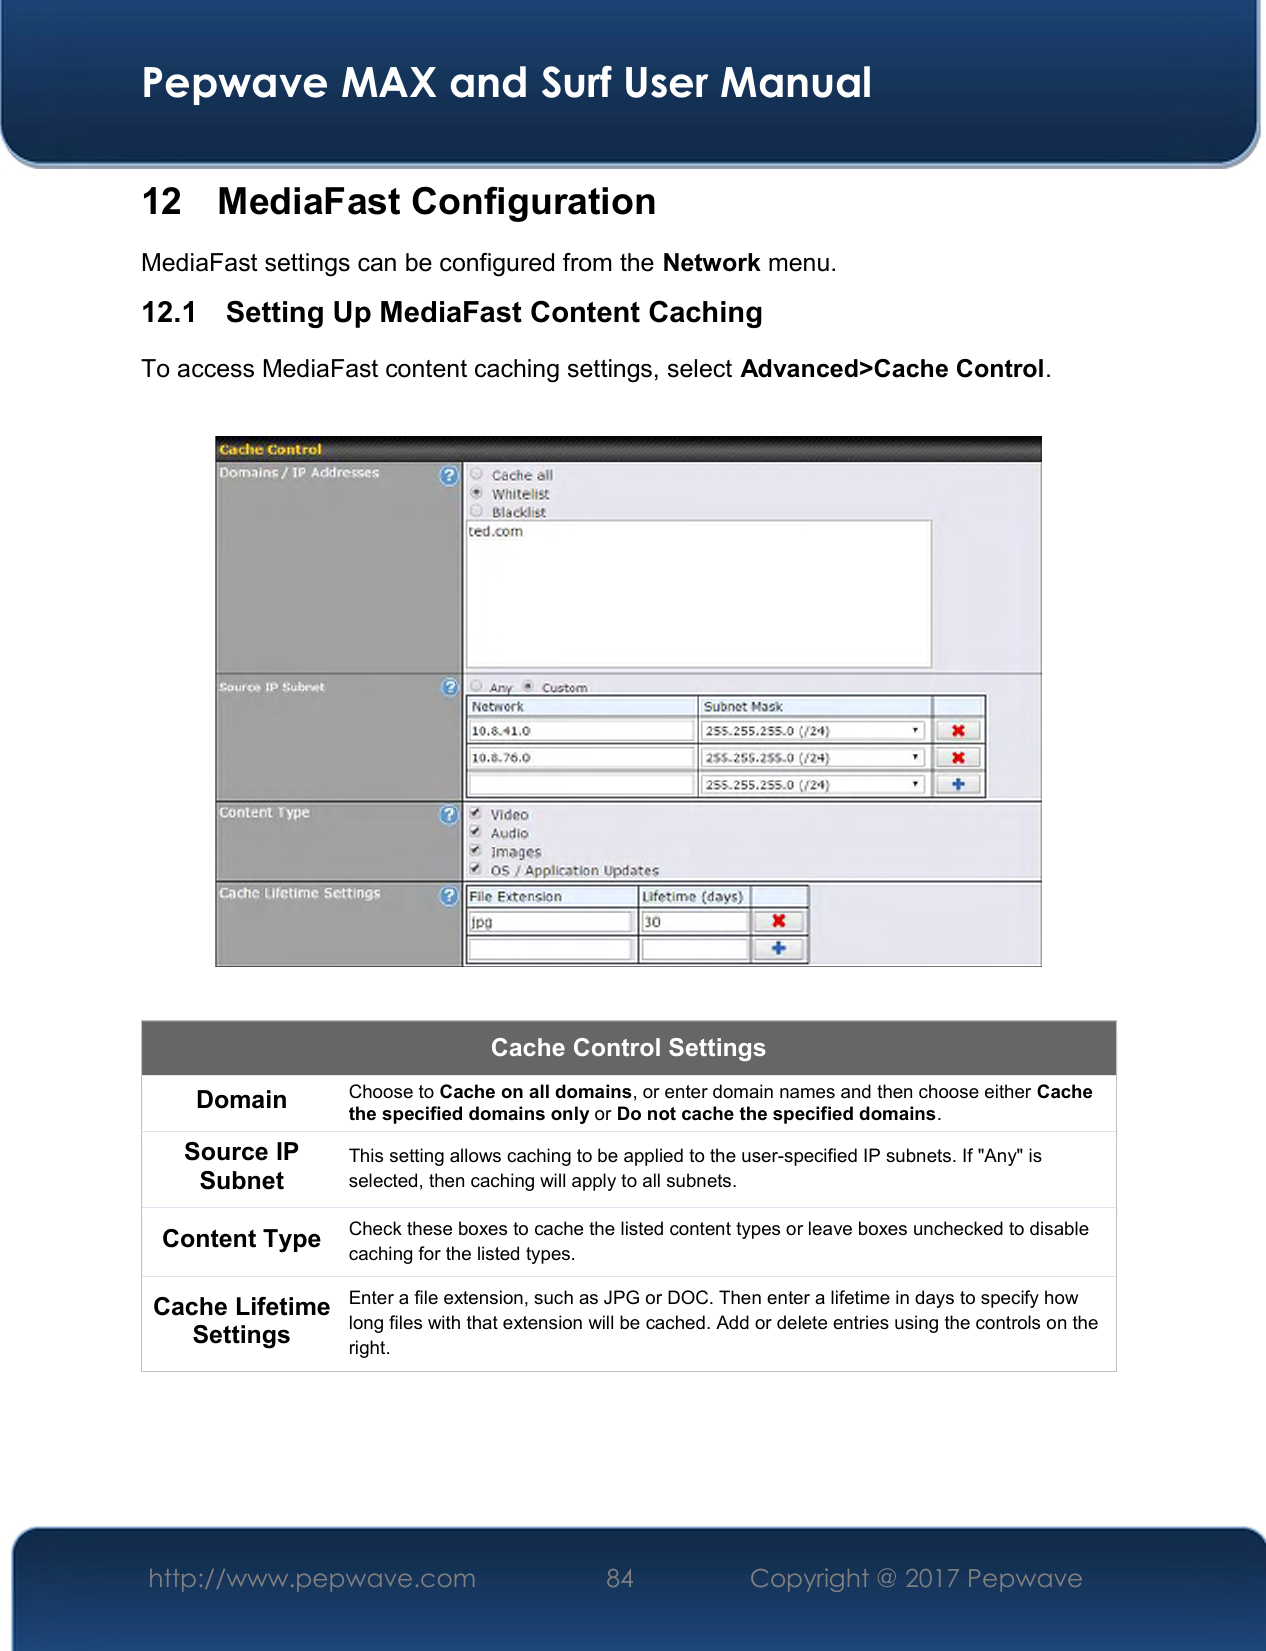  Pepwave MAX and Surf User Manual http://www.pepwave.com  84    Copyright @ 2017 Pepwave   12  MediaFast Configuration MediaFast settings can be configured from the Network menu. 12.1   Setting Up MediaFast Content Caching To access MediaFast content caching settings, select Advanced&gt;Cache Control.    Cache Control Settings Domain  Choose to Cache on all domains, or enter domain names and then choose either Cache the specified domains only or Do not cache the specified domains. Source IP Subnet This setting allows caching to be applied to the user-specified IP subnets. If &quot;Any&quot; is selected, then caching will apply to all subnets. Content Type  Check these boxes to cache the listed content types or leave boxes unchecked to disable caching for the listed types. Cache Lifetime Settings Enter a file extension, such as JPG or DOC. Then enter a lifetime in days to specify how long files with that extension will be cached. Add or delete entries using the controls on the right.    